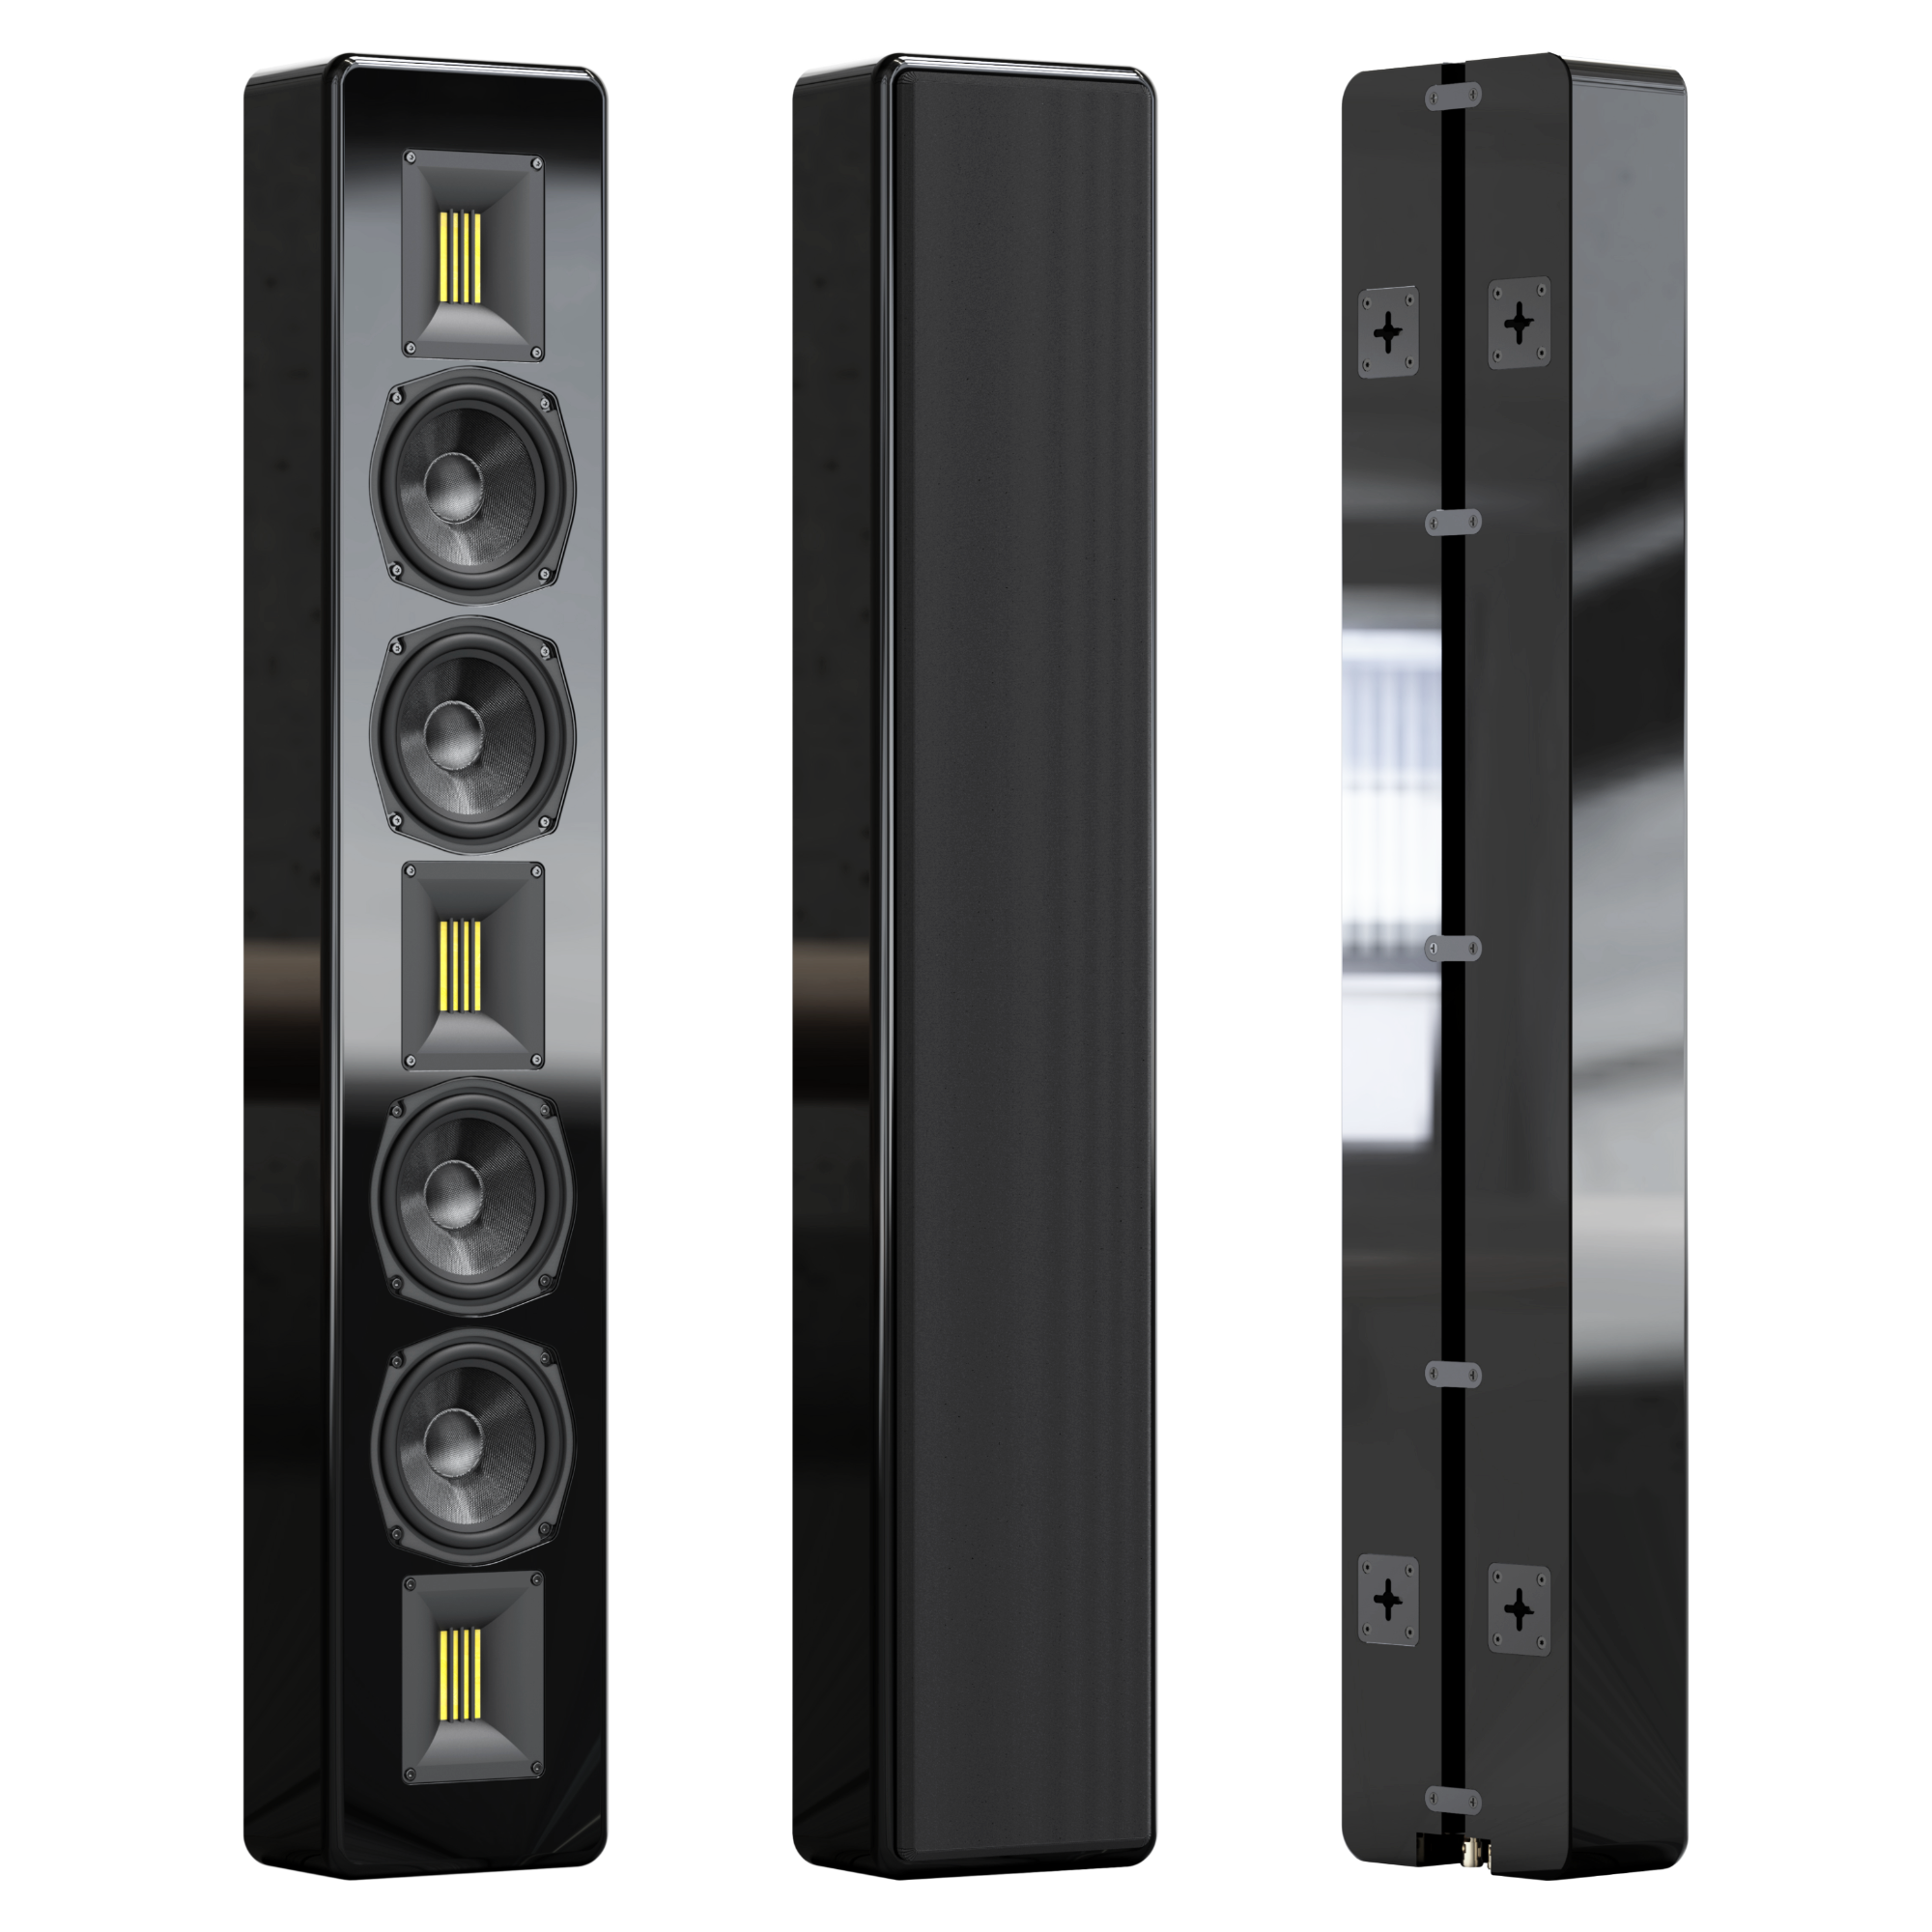 The Earthquake OW-4503 Line Array LCR Speaker is used for in-wall home theater applications that serves as a left, right, center, and surround sound channels.